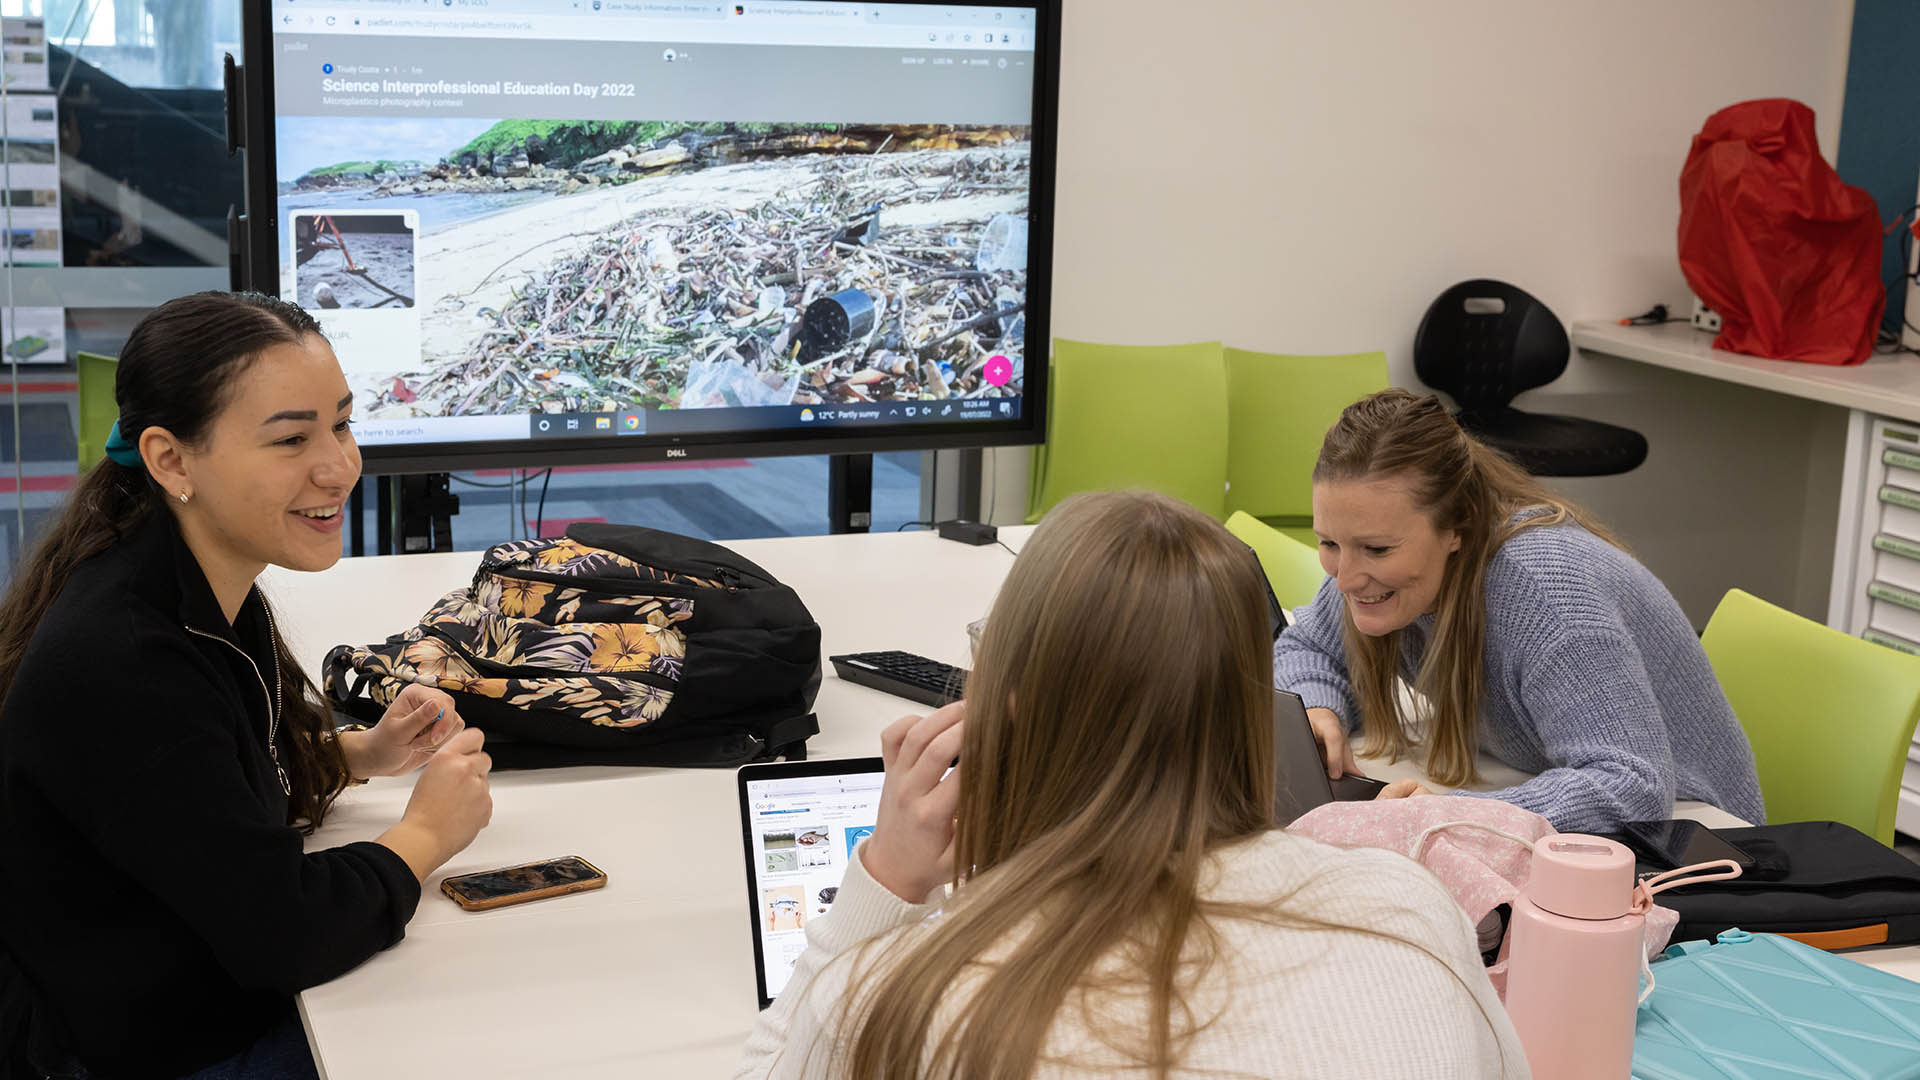 Students share ideas about how to tackle the problem of microplastics in the environment